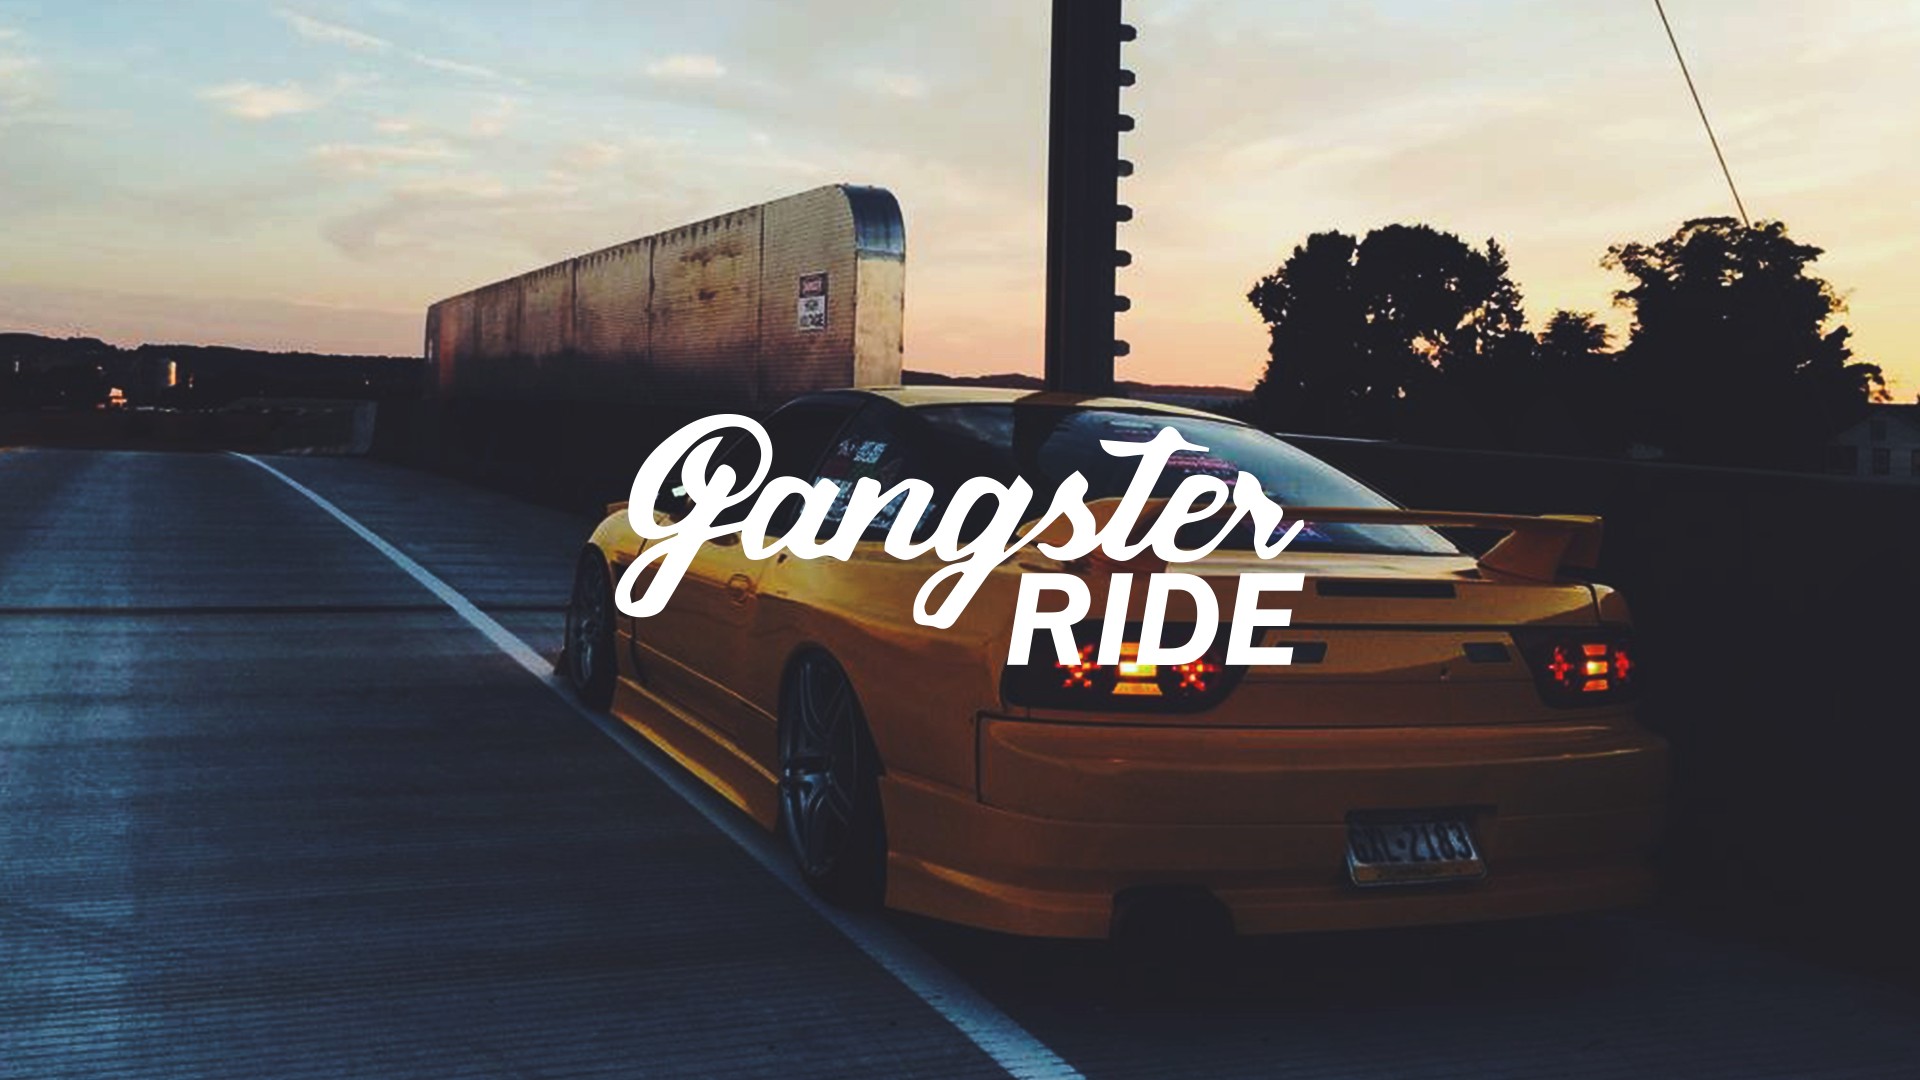 GANGSTER RIDE, Car, Tuning, Lowrider, Colorful, Nissan Wallpaper HD / Desktop and Mobile Background